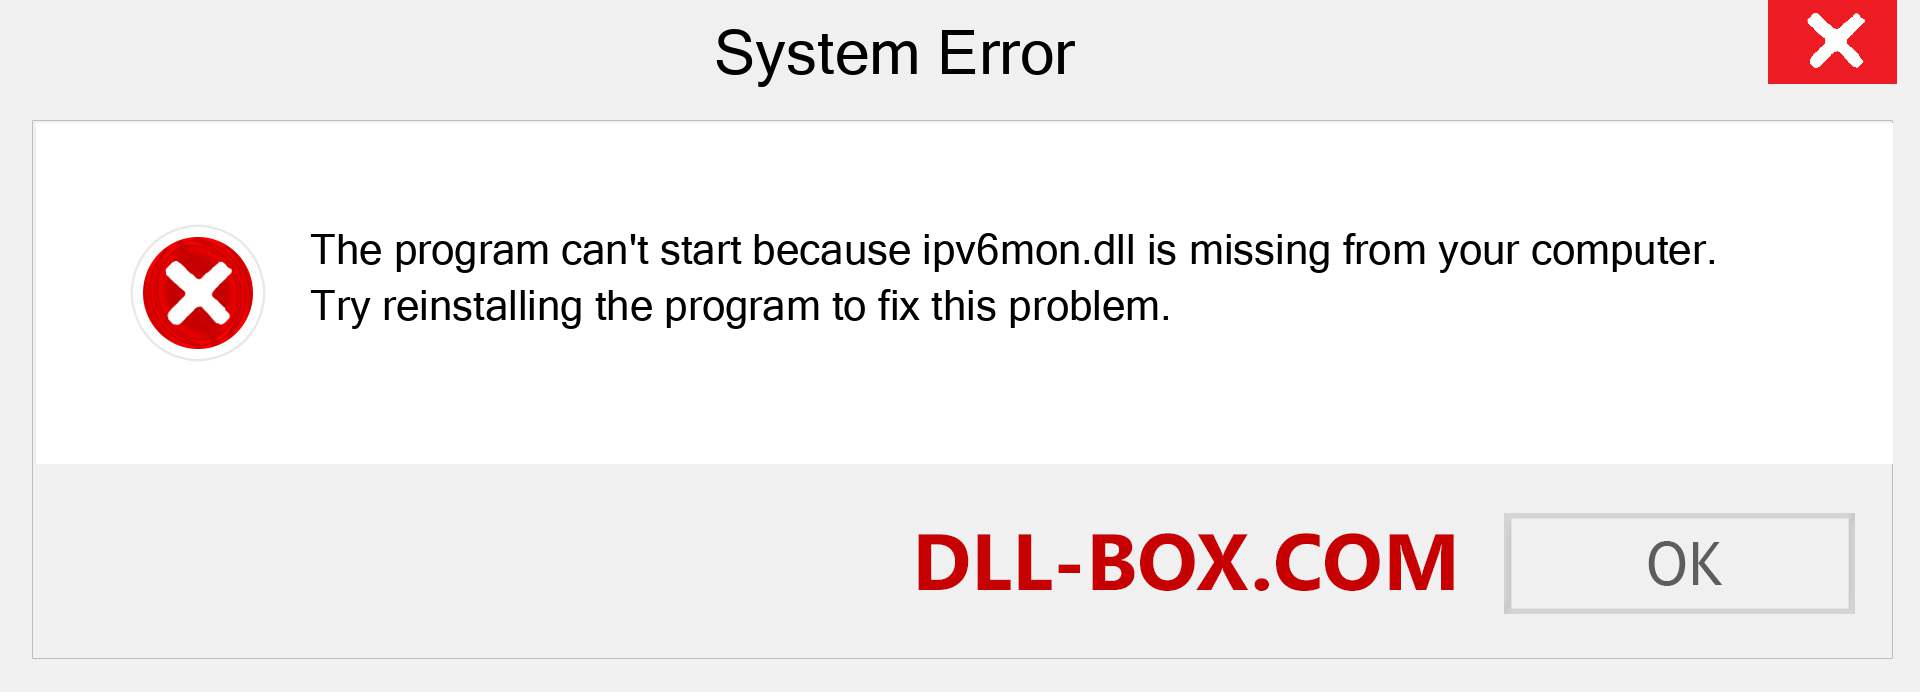  ipv6mon.dll file is missing?. Download for Windows 7, 8, 10 - Fix  ipv6mon dll Missing Error on Windows, photos, images